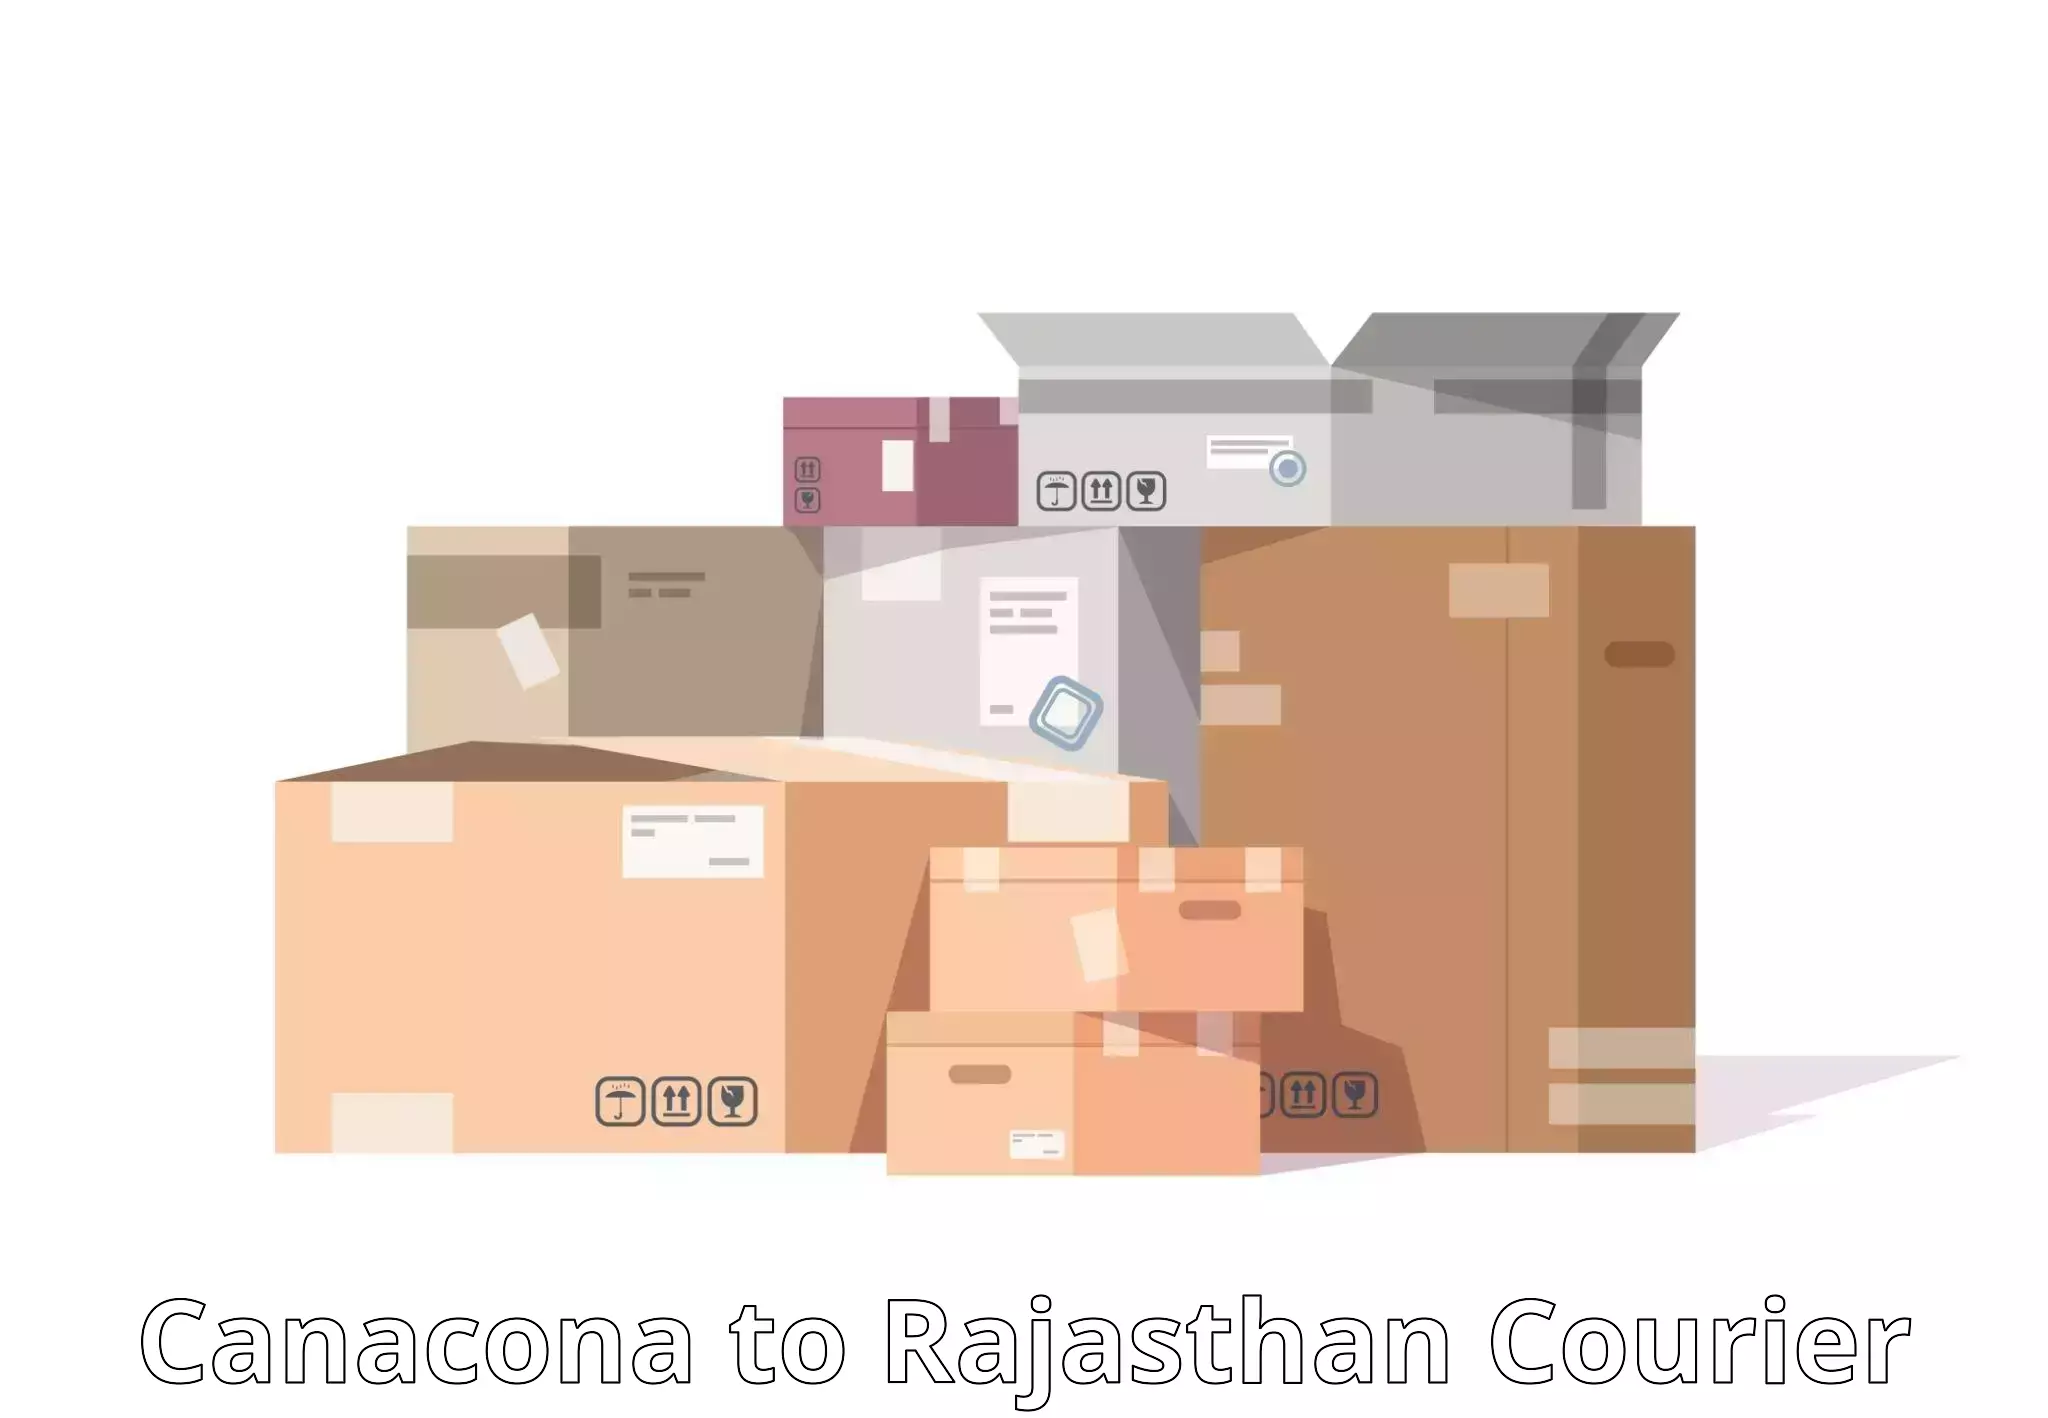 Same-day delivery options Canacona to Rajasthan